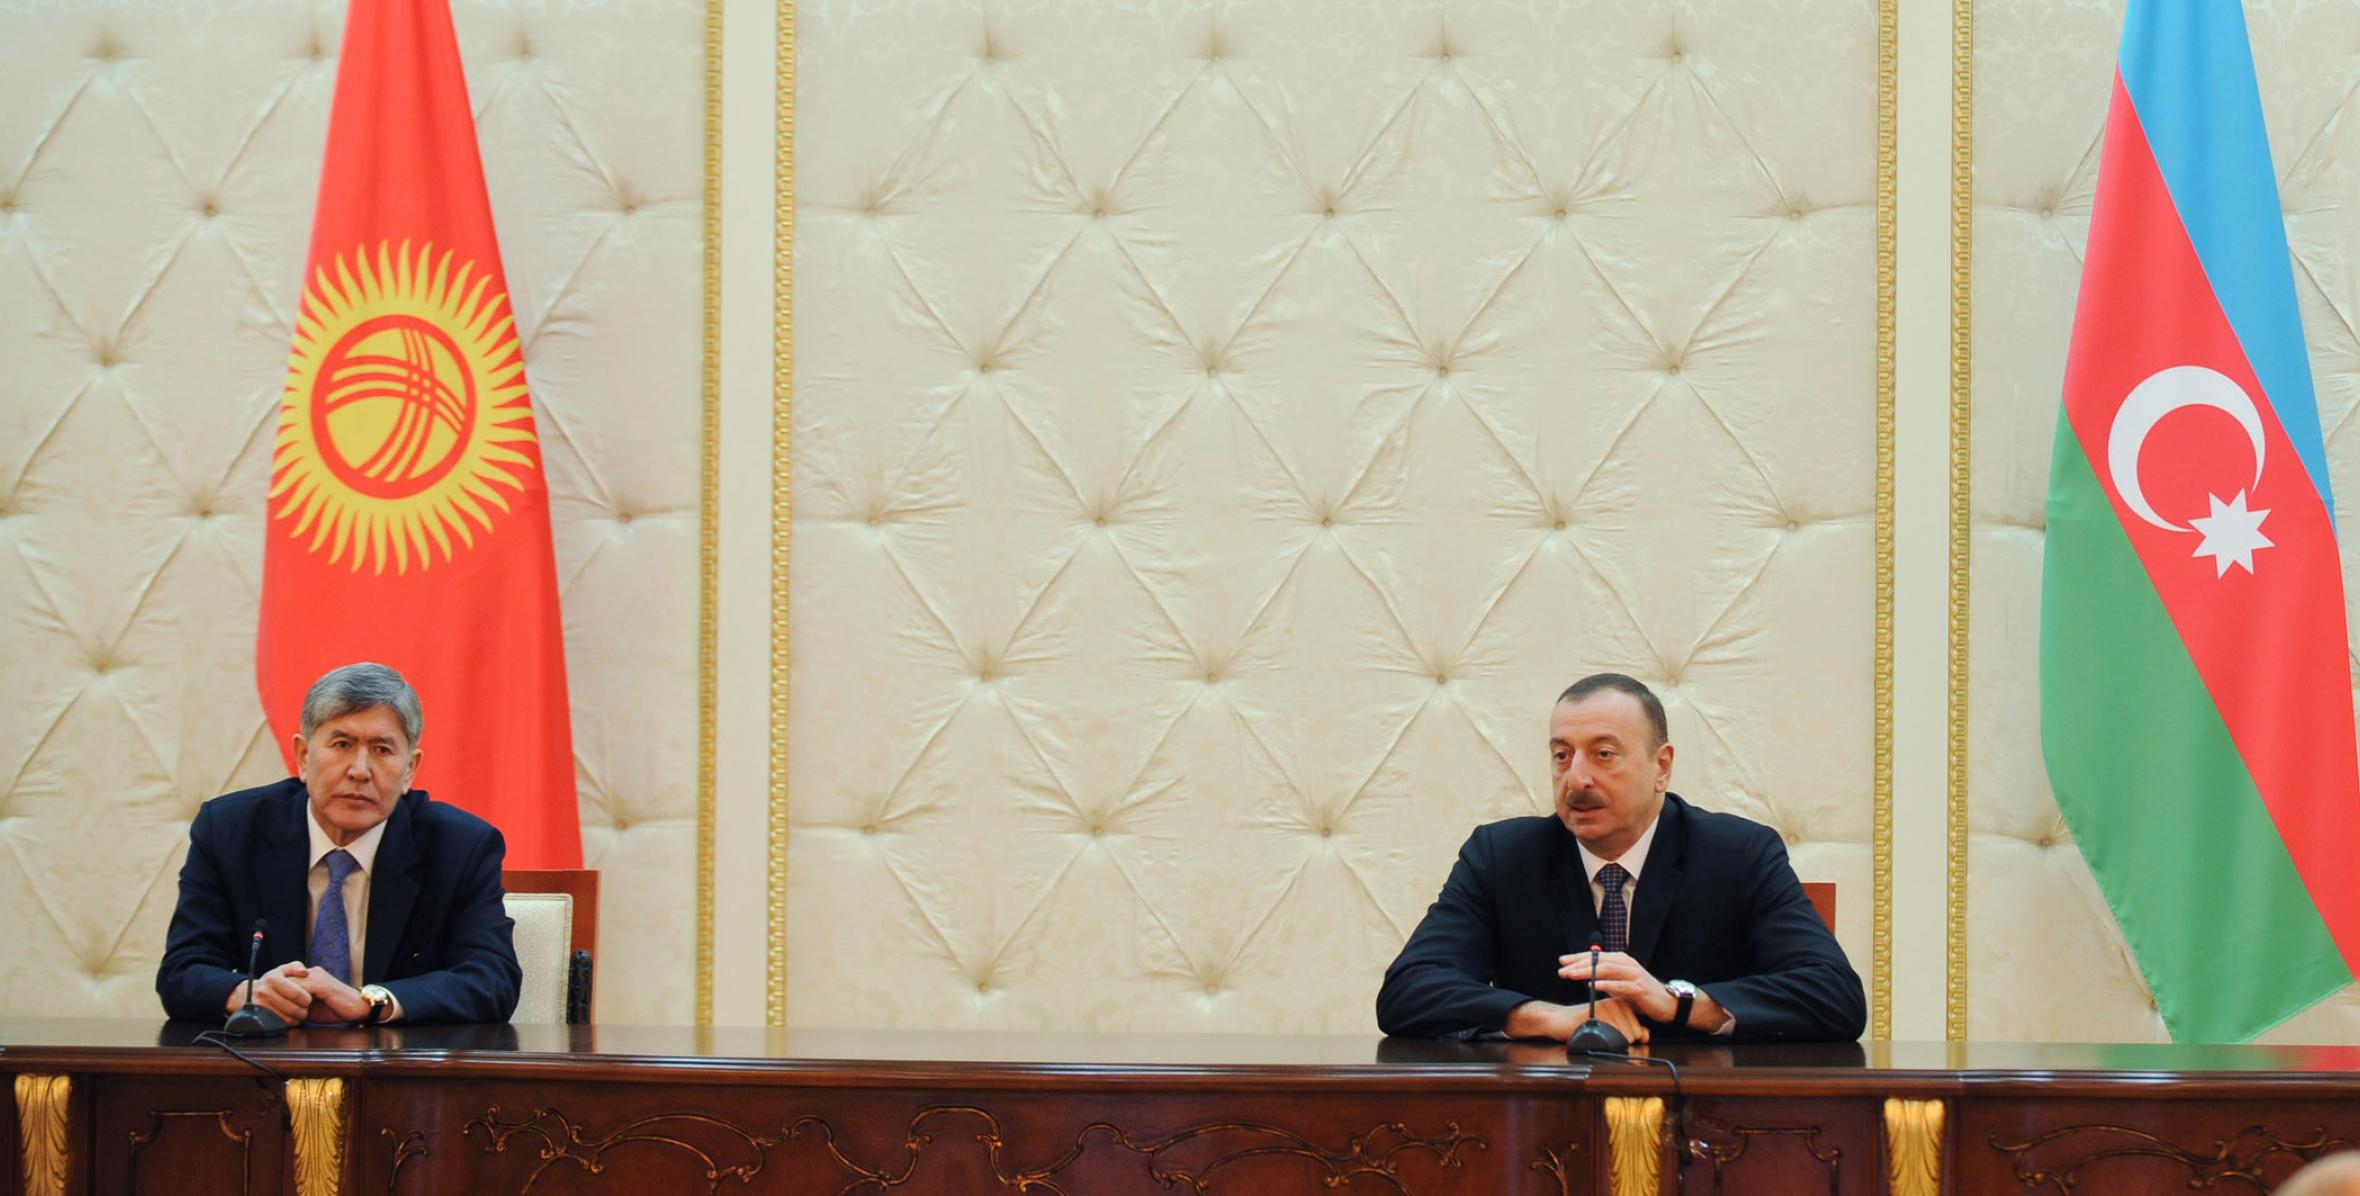 Press conference of the Presidents of Azerbaijan and Kyrgyzstan was held